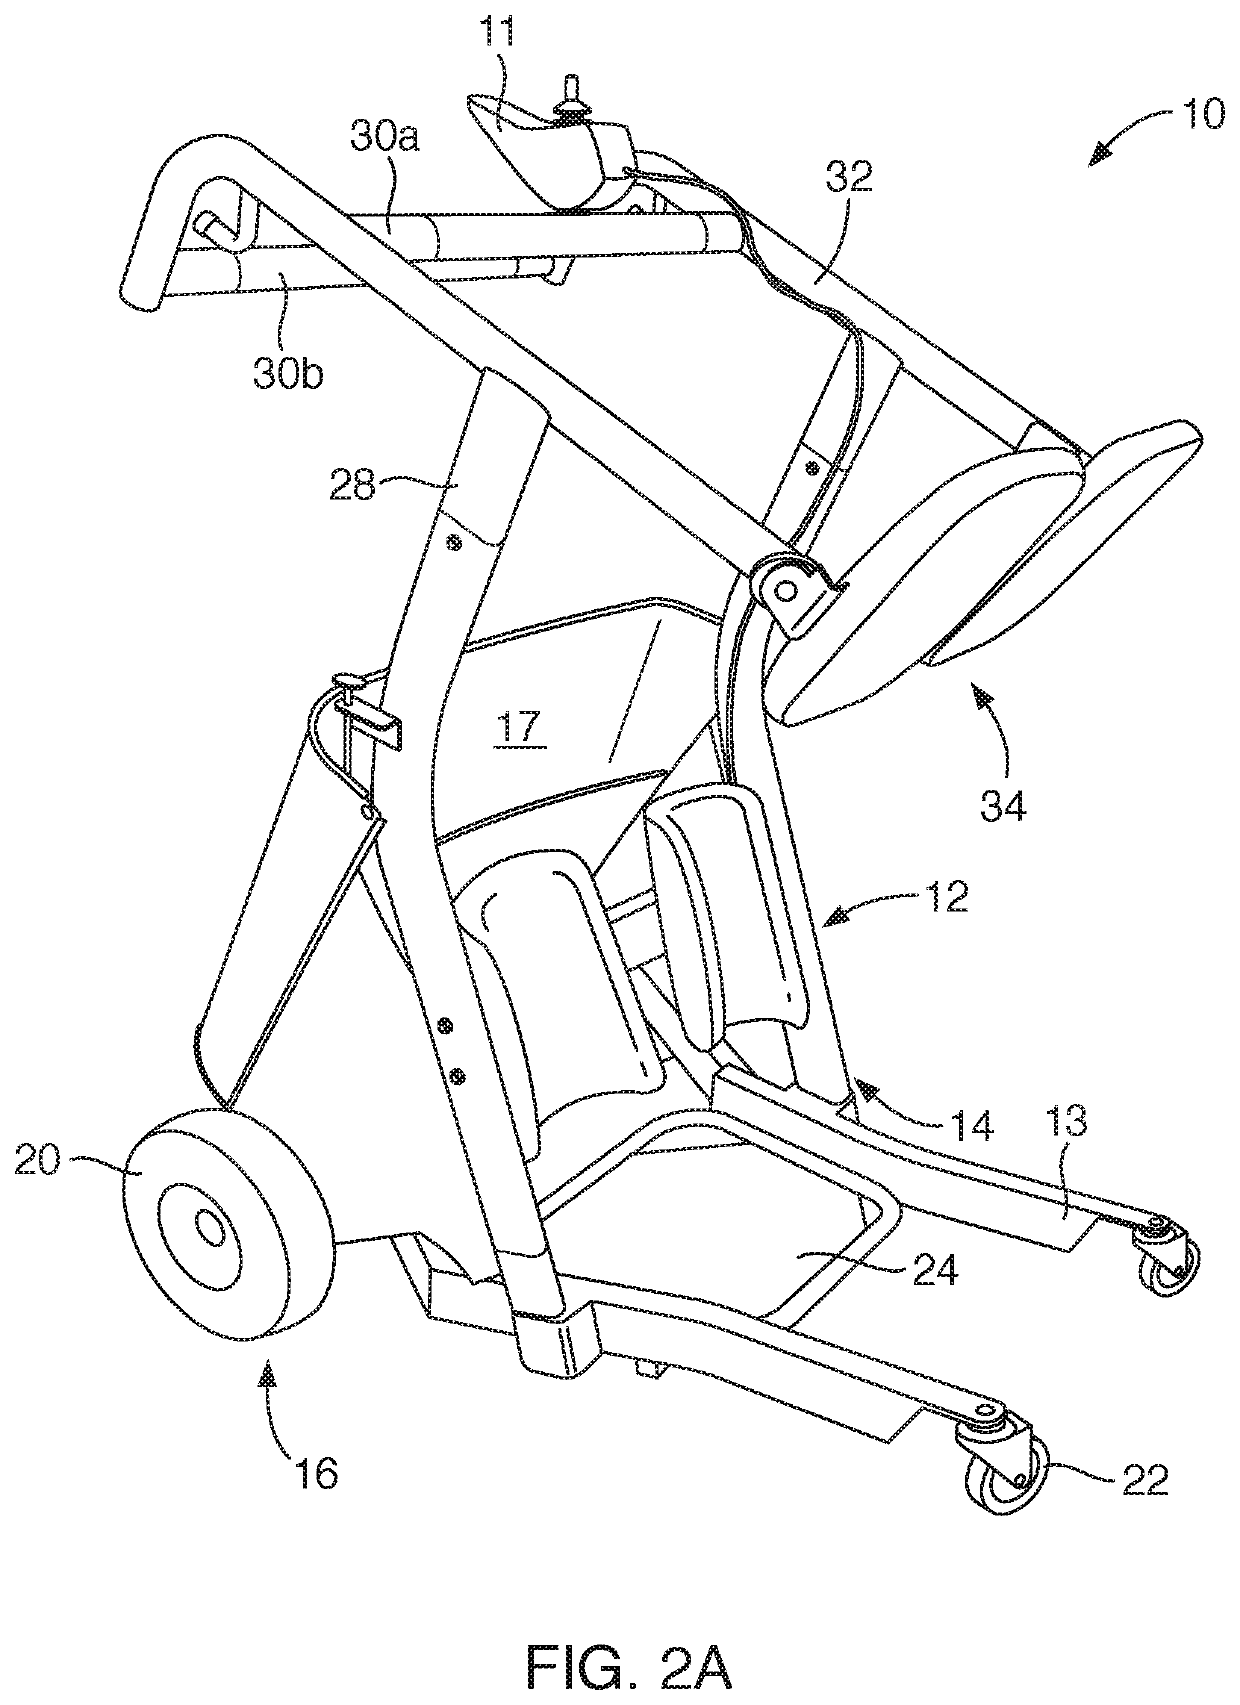 Exercising, mobility transporter apparatus and method